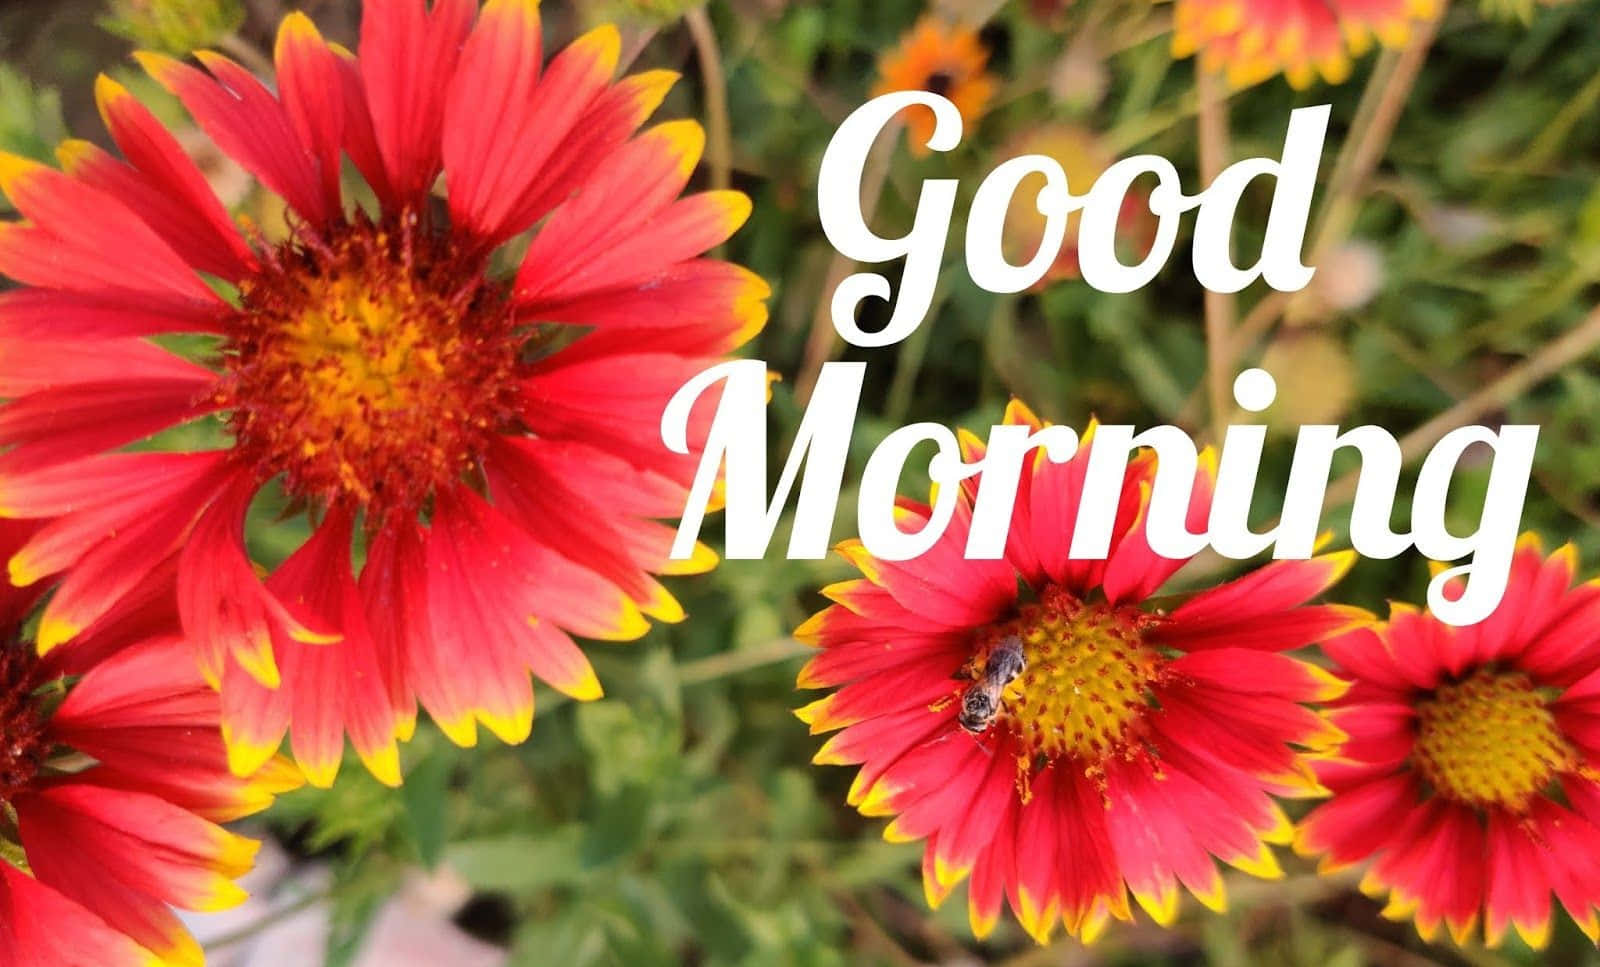 Download Good Morning Garden View Picture | Wallpapers.com